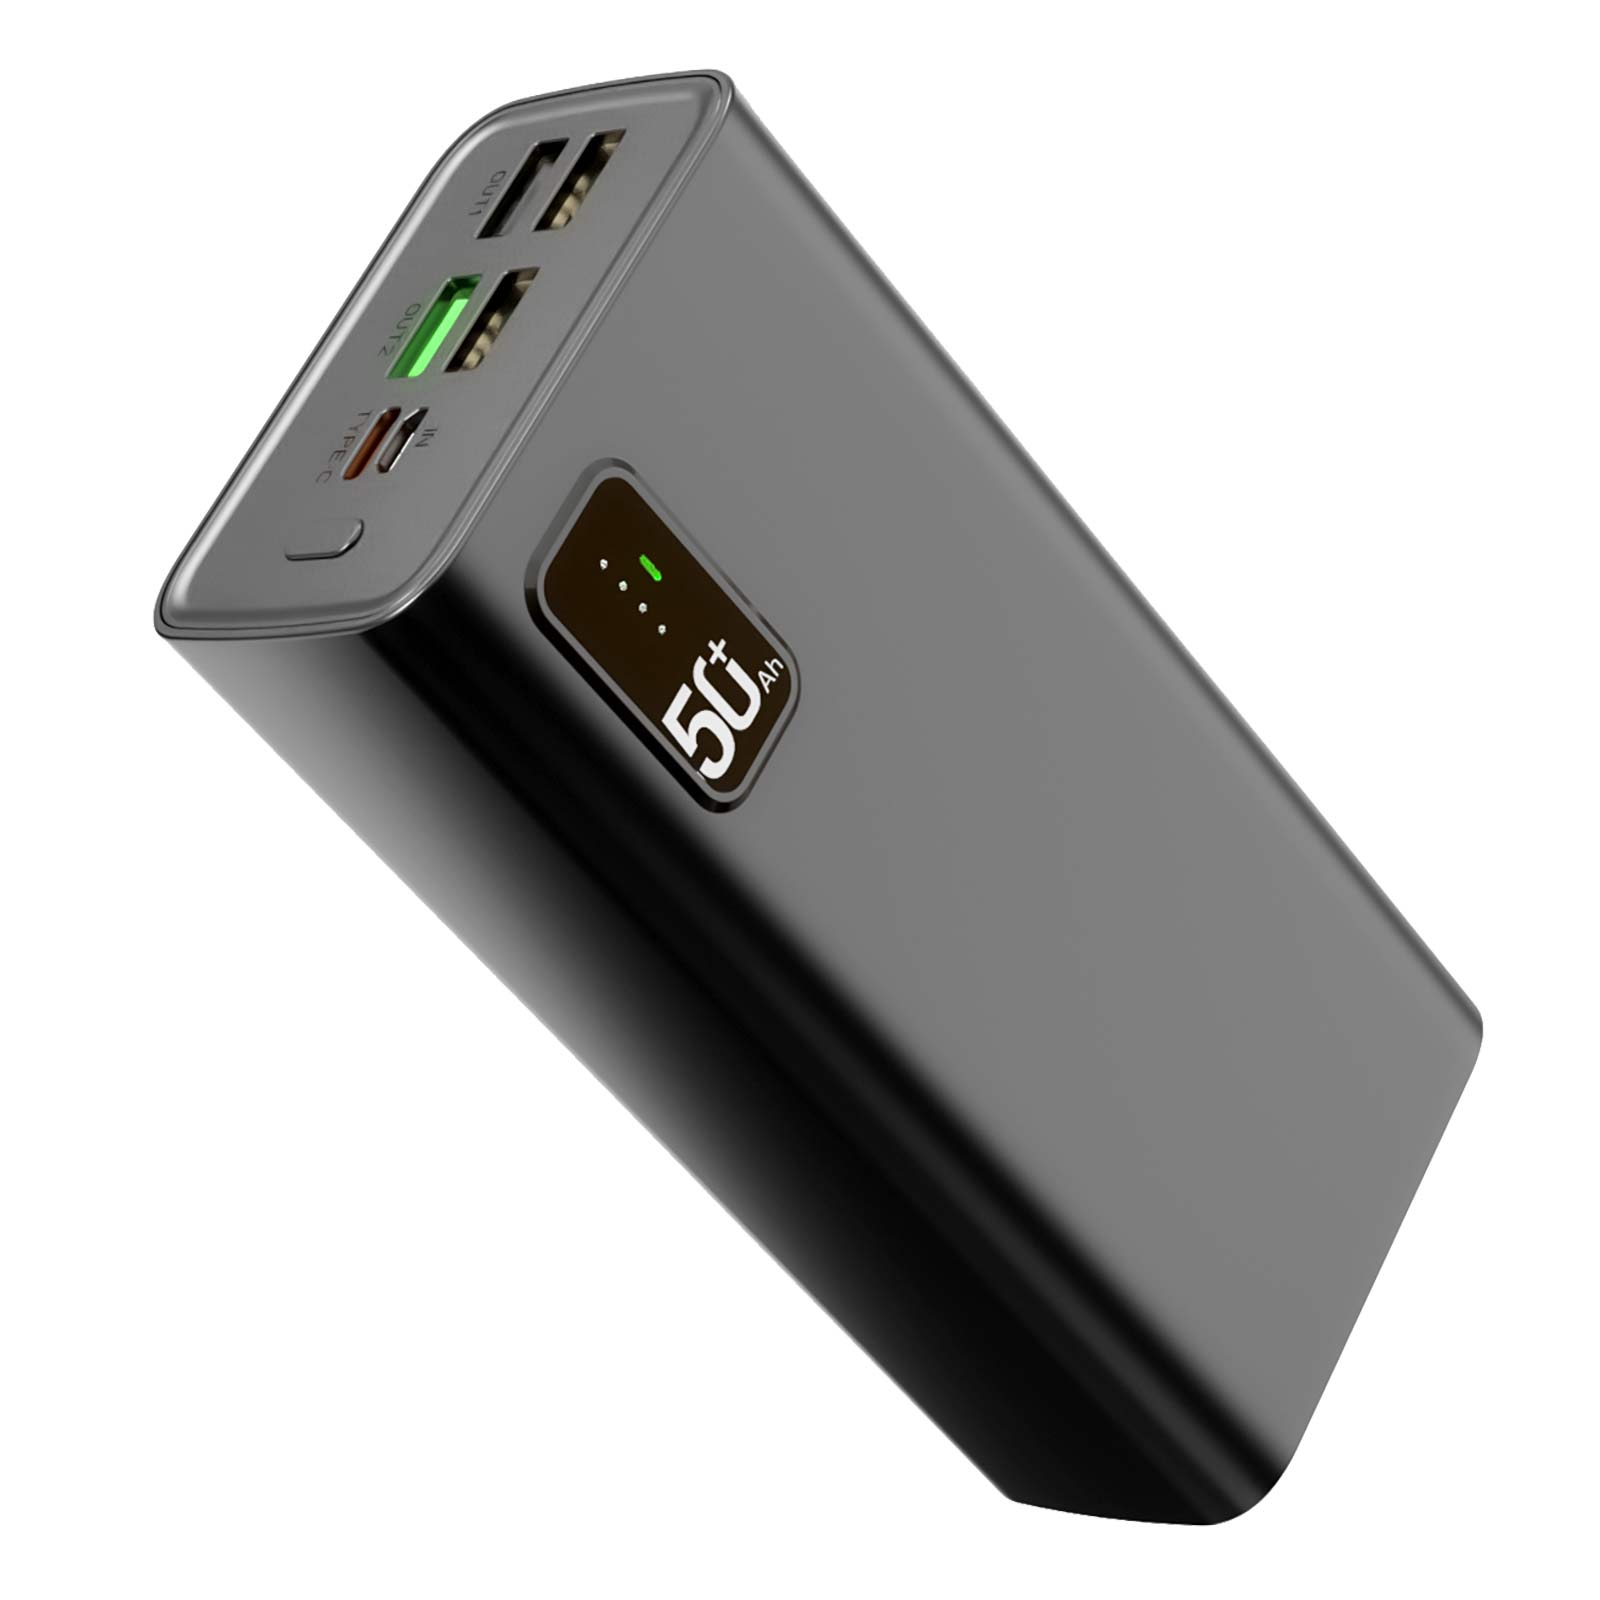 Toospon- Power Bank, QC3.0 22.5W & USB C PD20W Portable Charger 50000mah External Battery Pack, 2 Inputs & 5 Outputs Quick Charge For IPhone Samsung Camera Pad Headset etc.